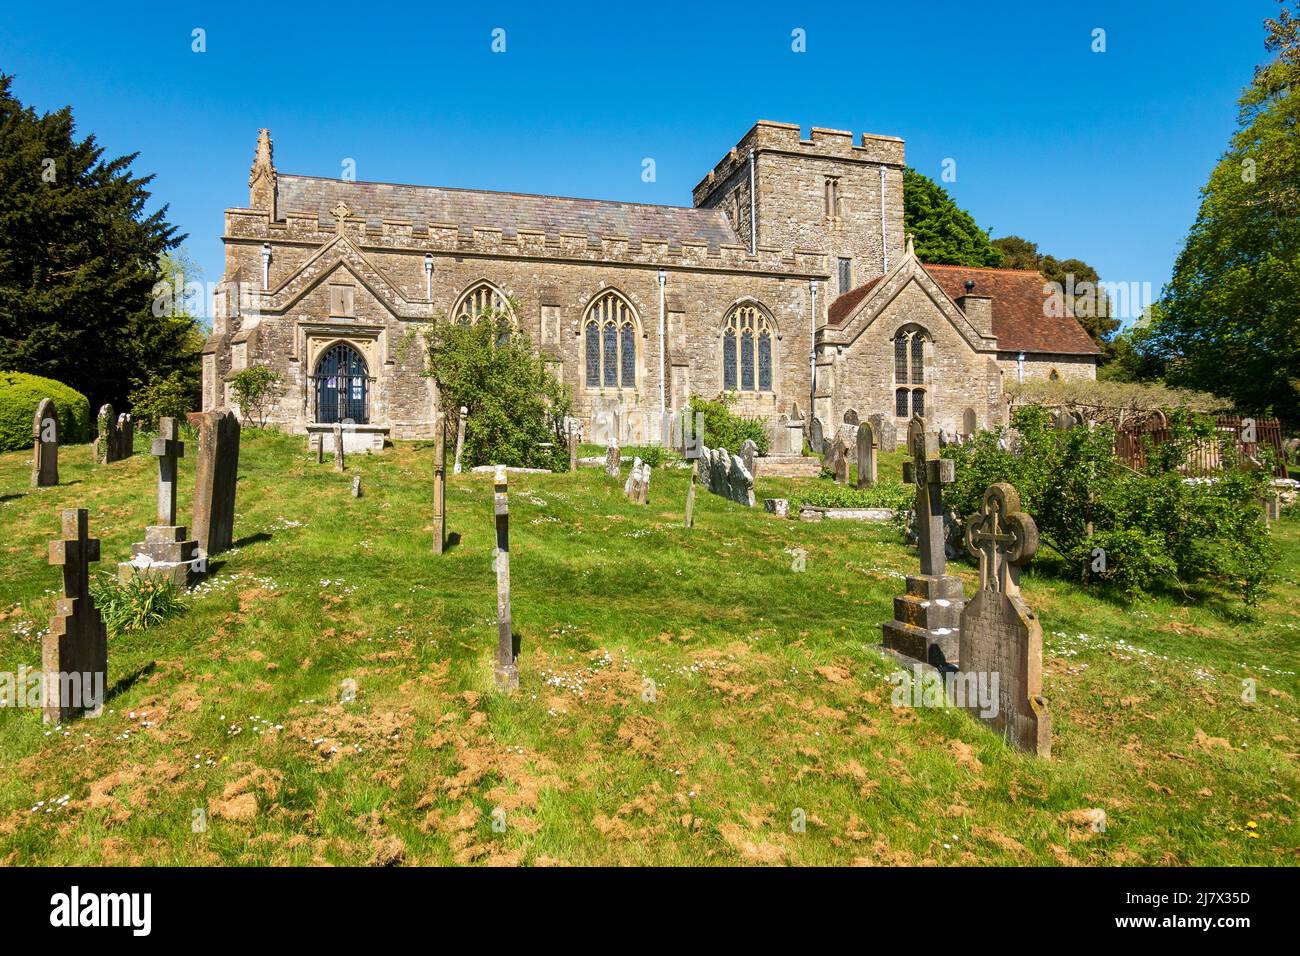 St Peter's Church, Boughton Monchelsea in Kent, is an excellent stop on the Greensands Way footpath, UK Stock Photo